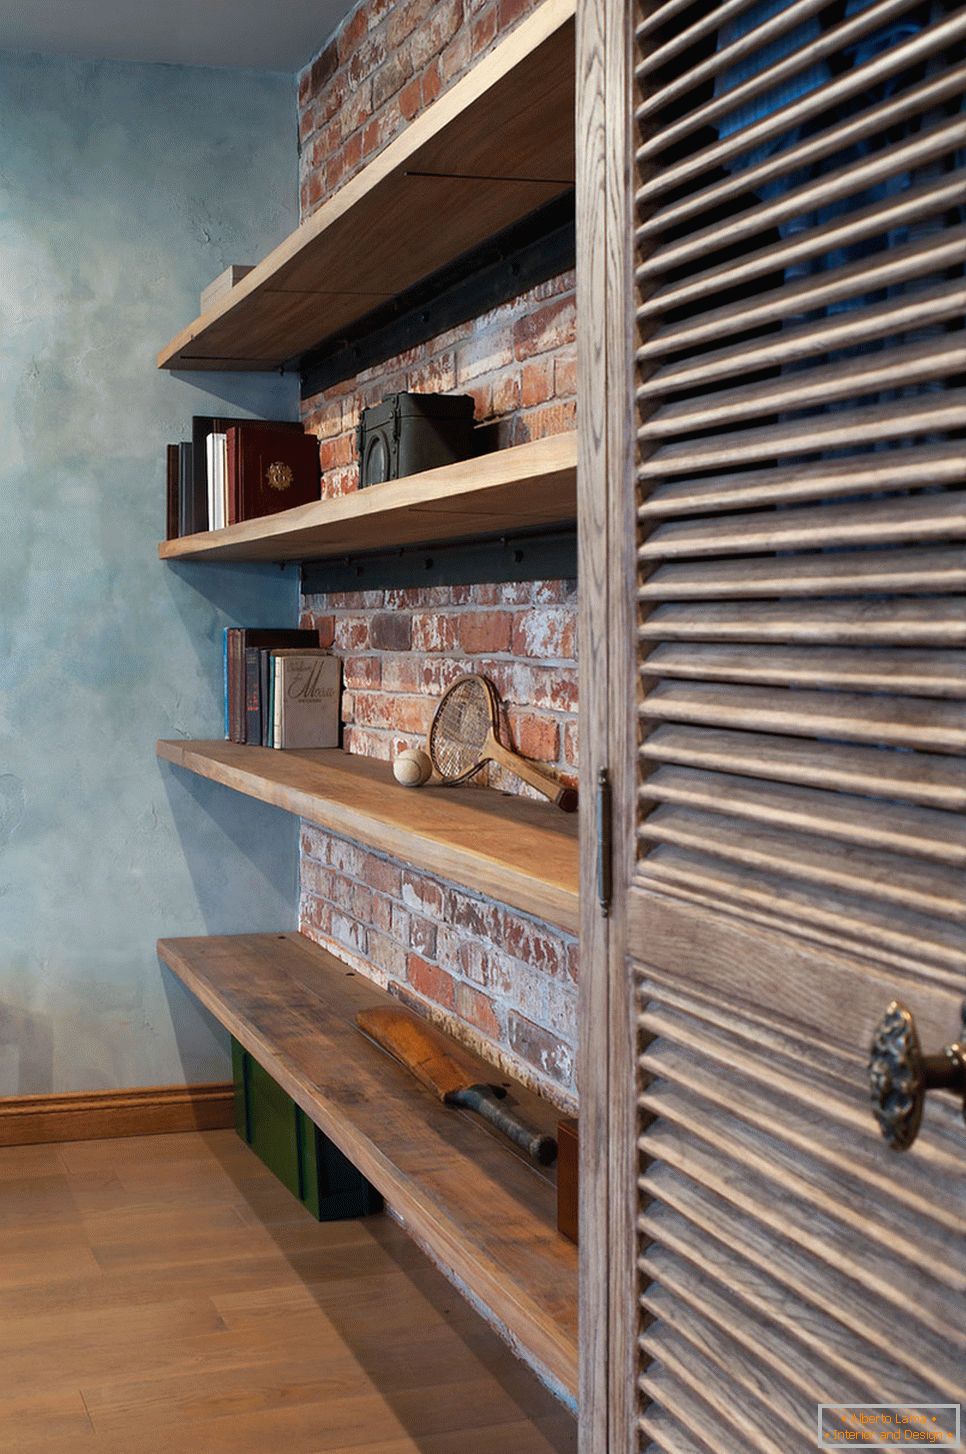 Shelves in an apartment in the loft style